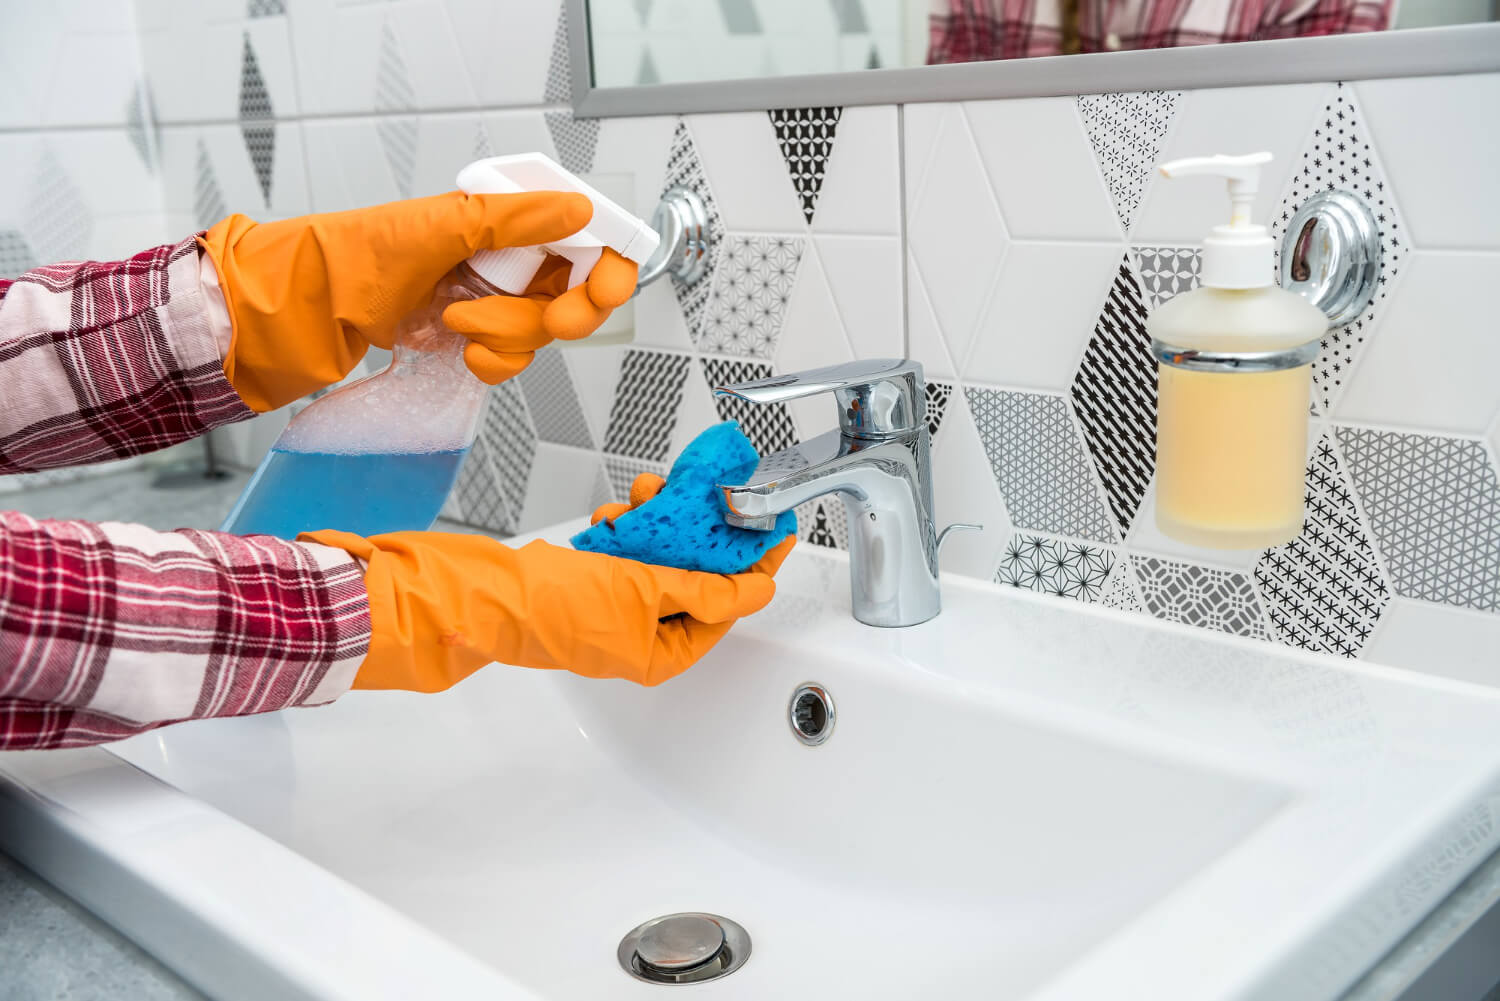 close up female cleaner hands in orange protective gloves cleaning bathroom sink with blue sponge and cleaning spray